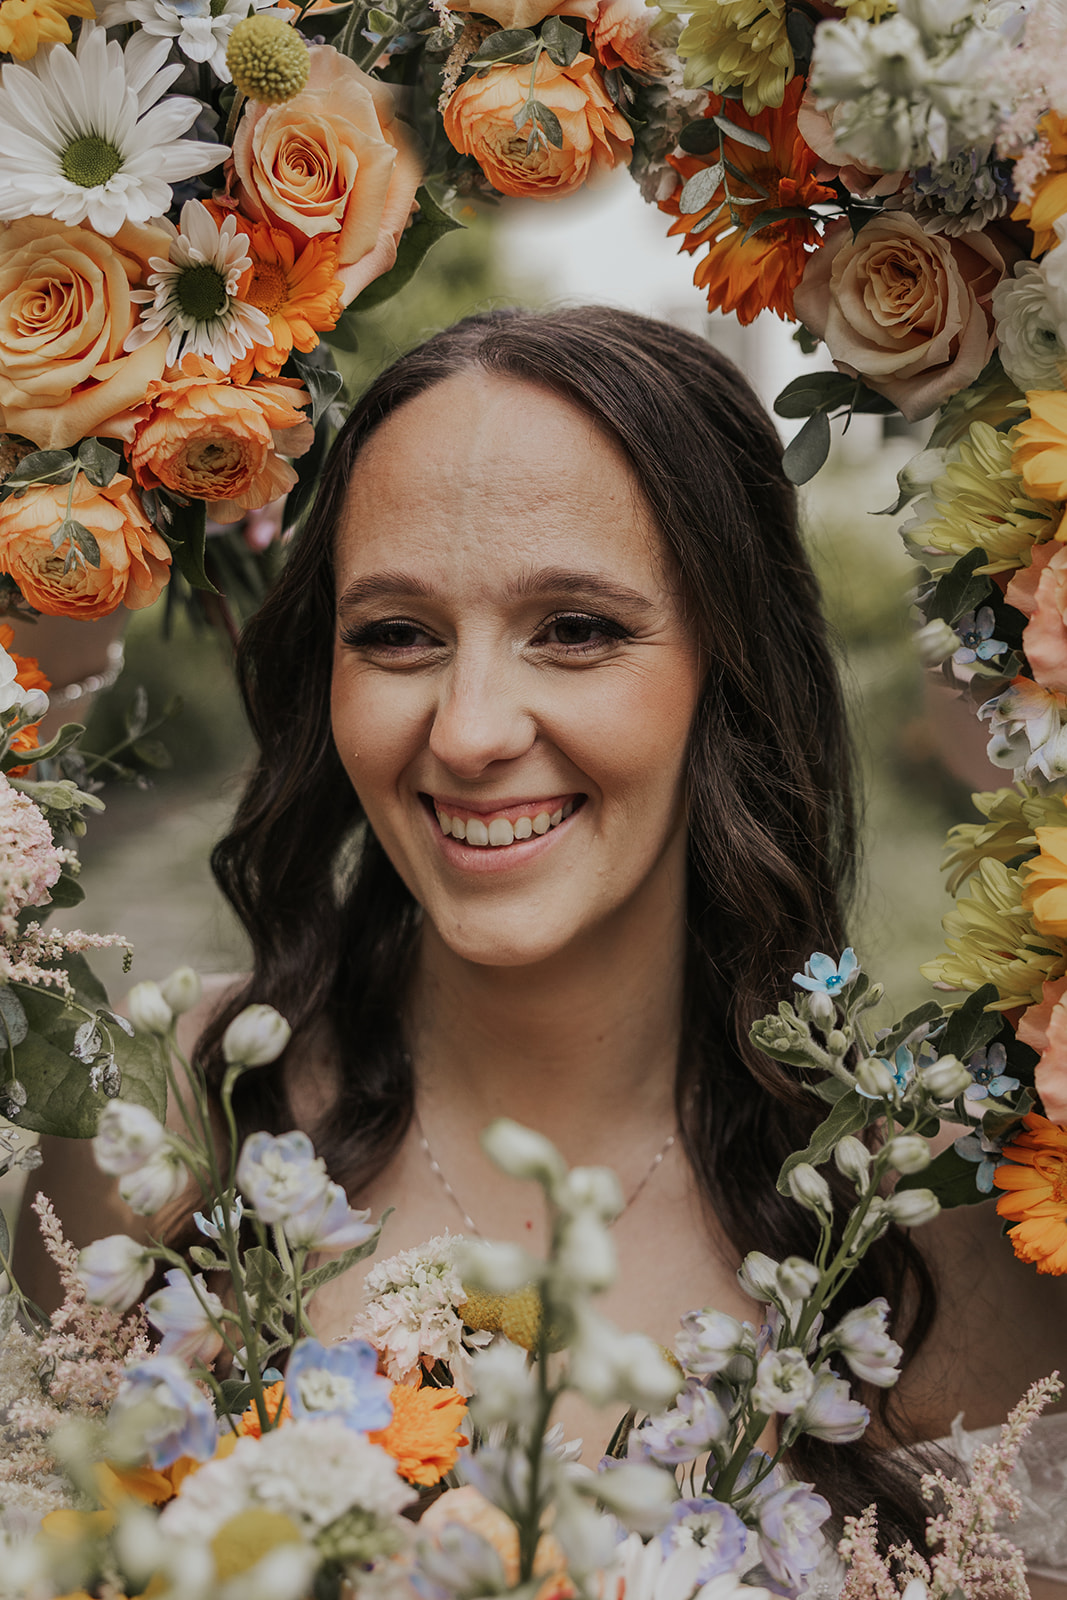 Stunning bride takes a photo looking through her flowers after her Sentimental Georgia wedding